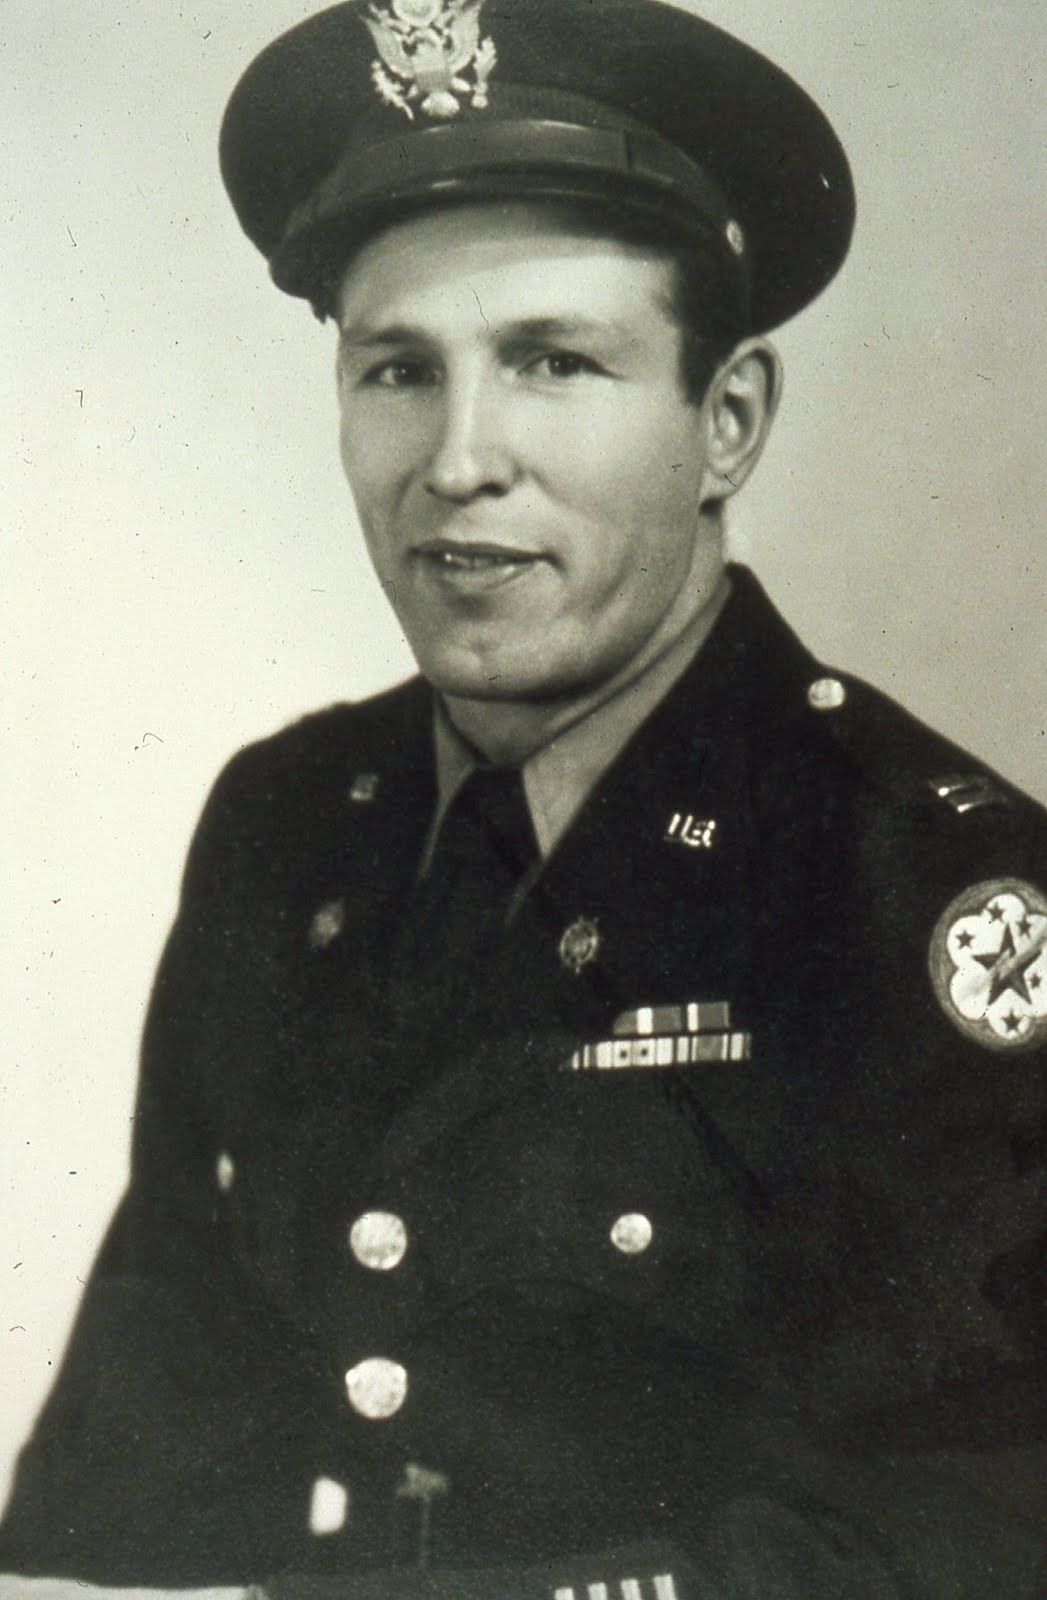 Ross Shirley Family: Military Service, 1943-1965